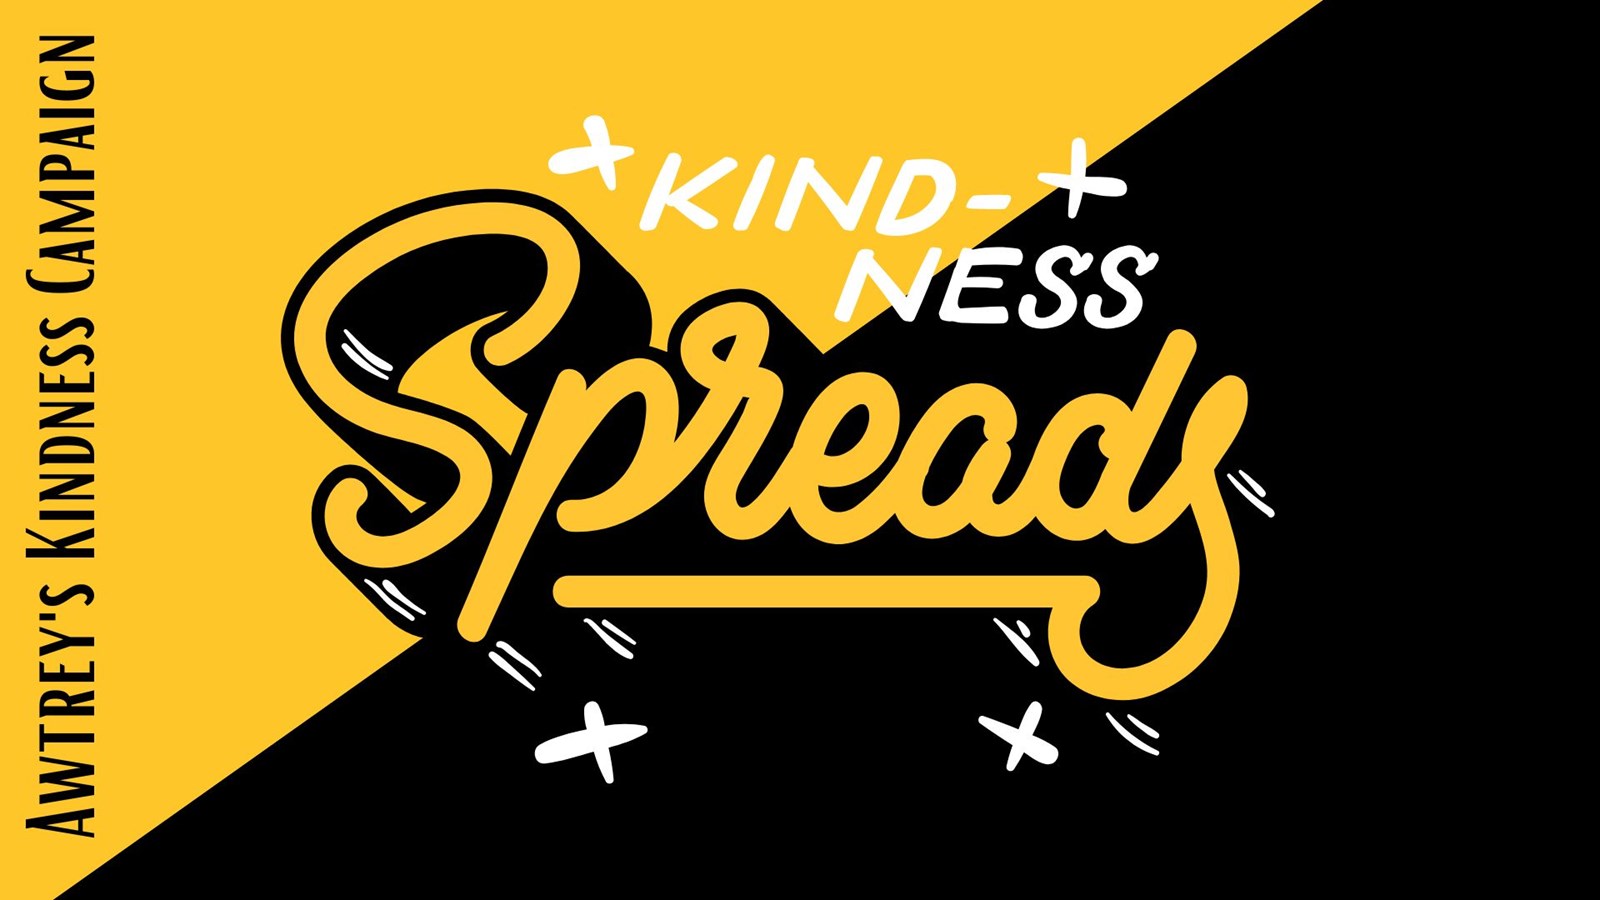 Awtrey's Kindness Campaign